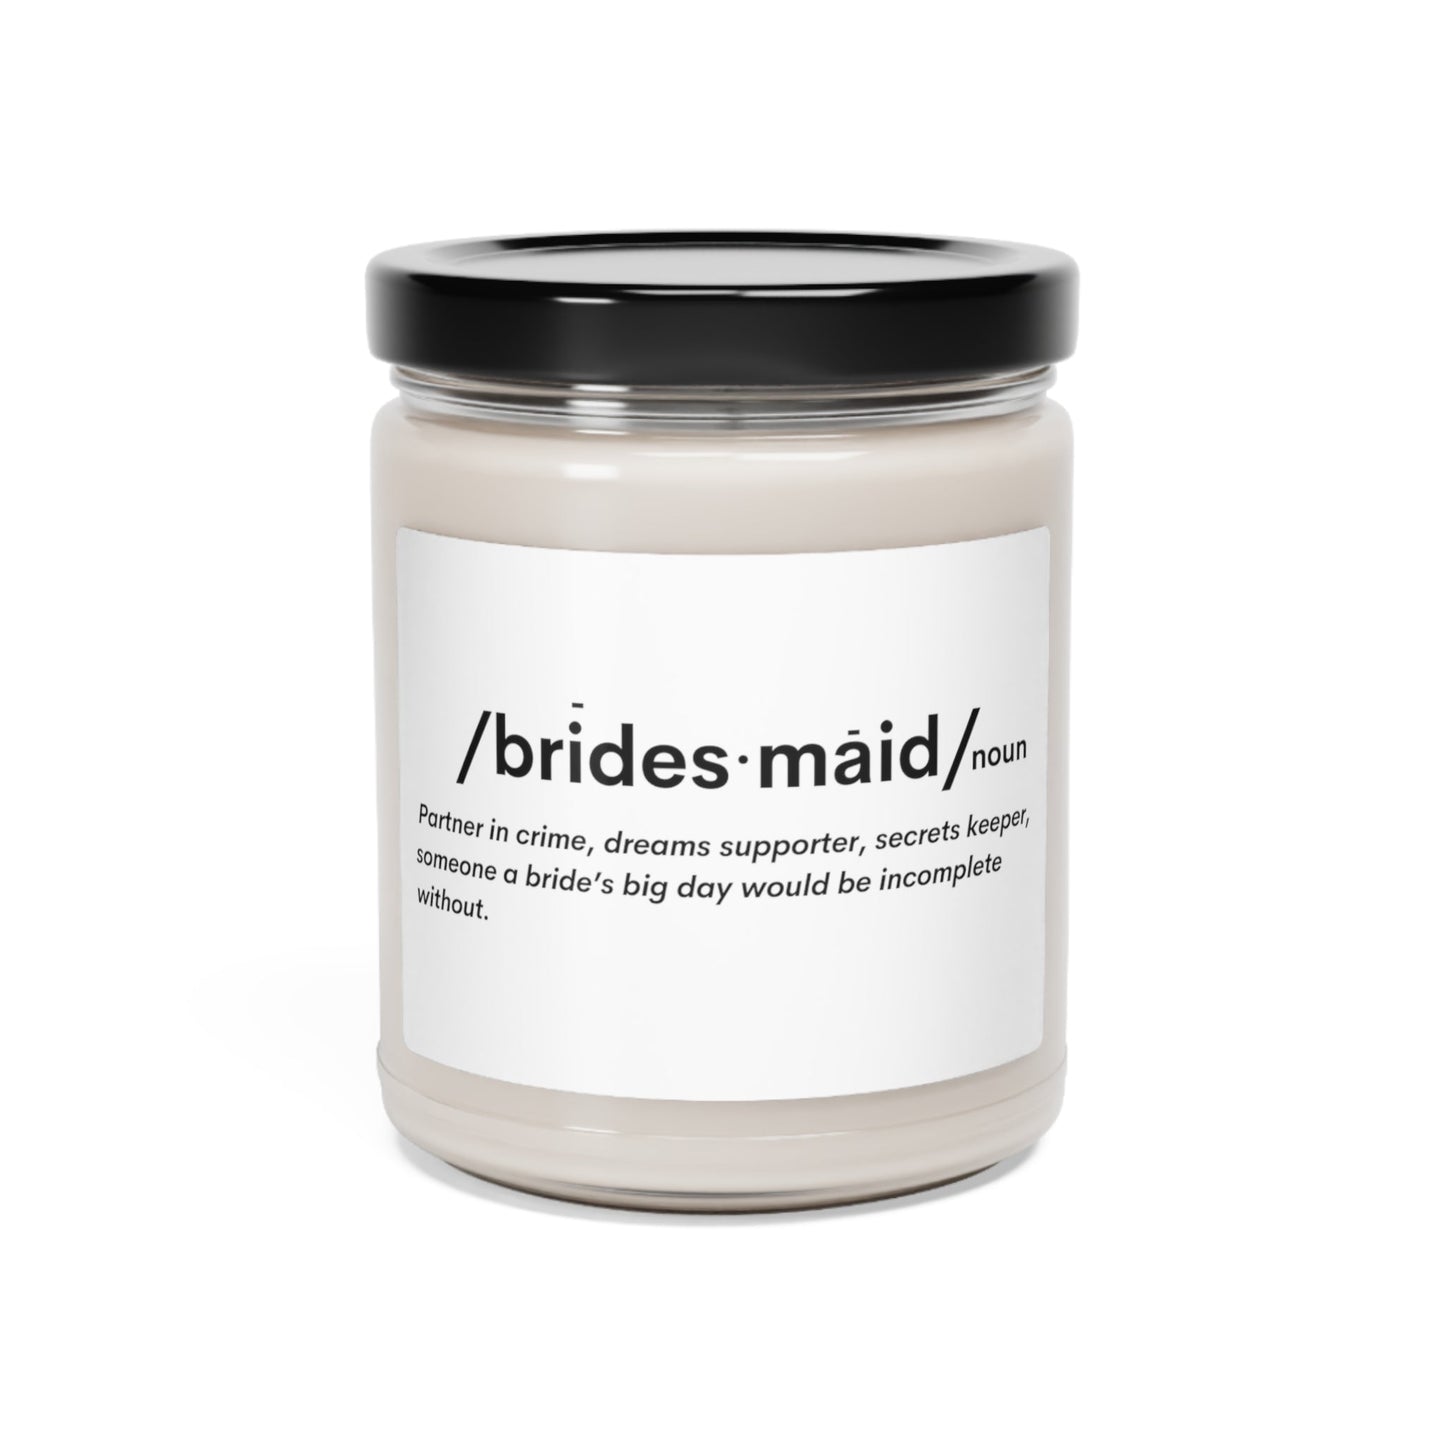 Get trendy with Bridesmaid Definition Candle - Home Decor available at Good Gift Company. Grab yours for $21 today!